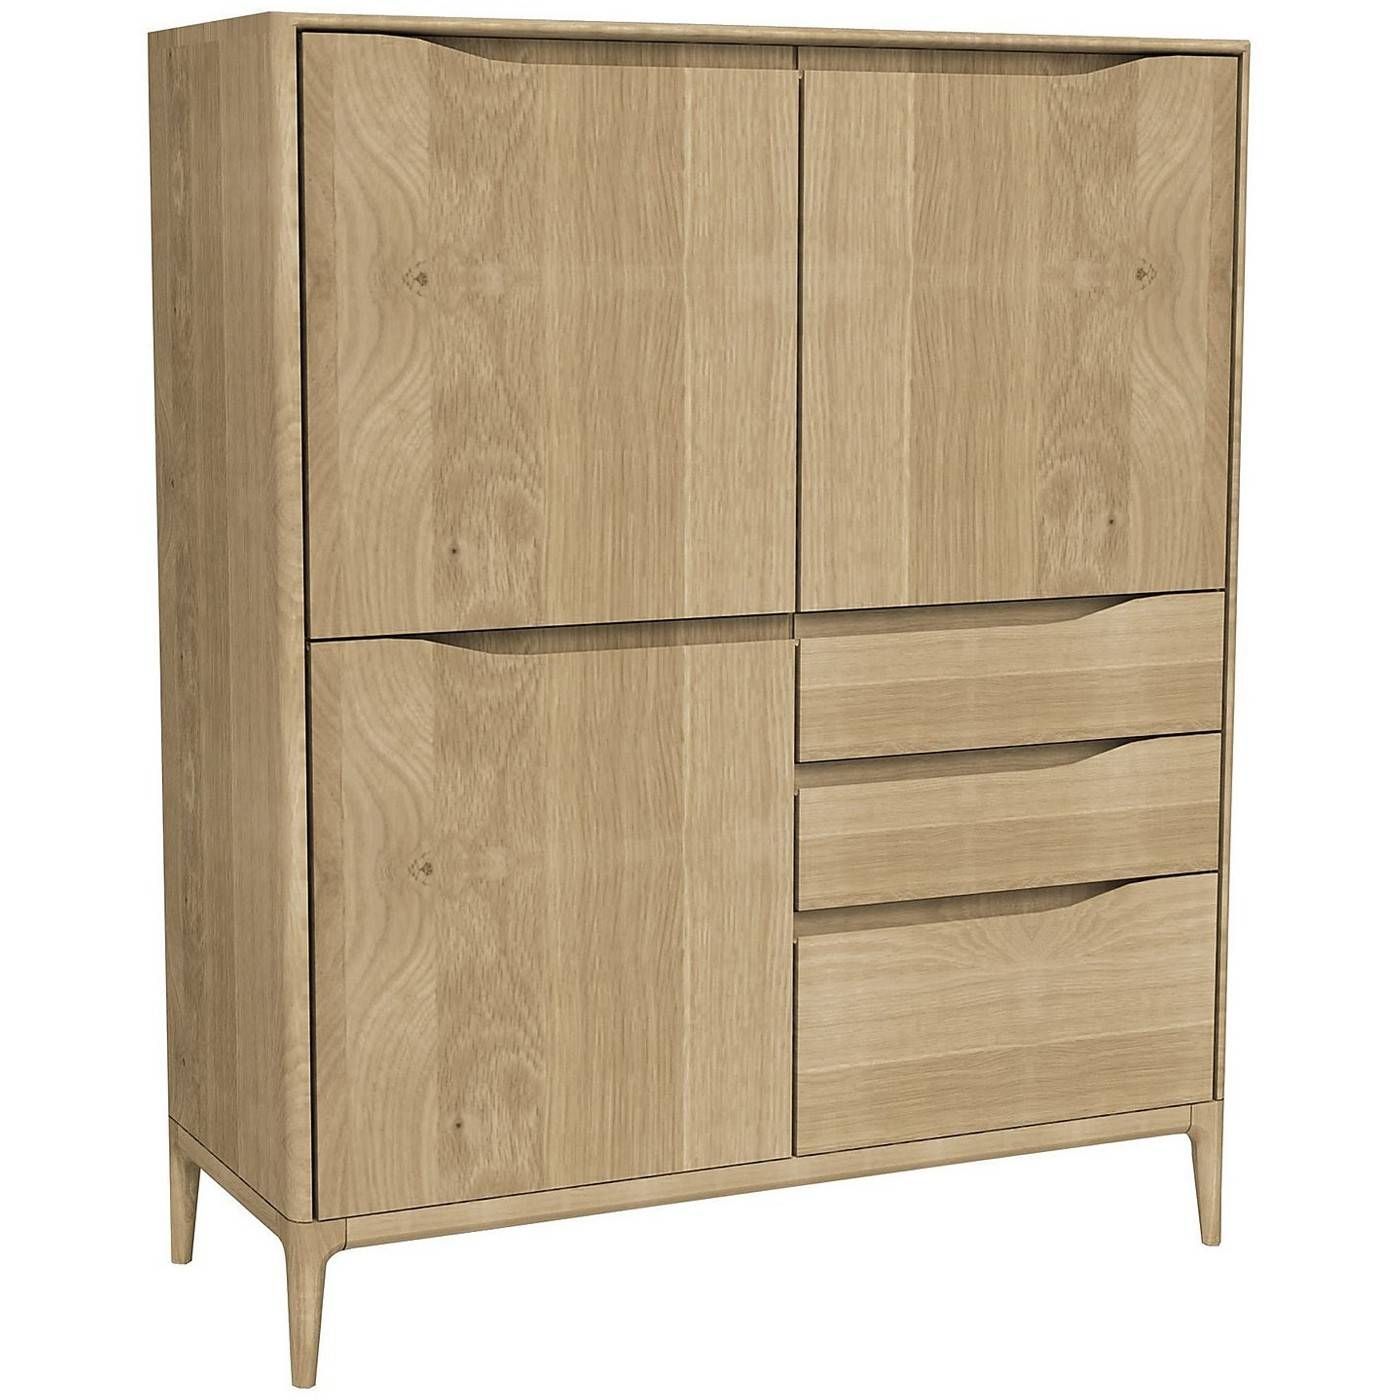 Designer Sideboards | Modern & Contemporary Sideboards | Heal's Regarding Contemporary Oak Sideboards (View 22 of 30)